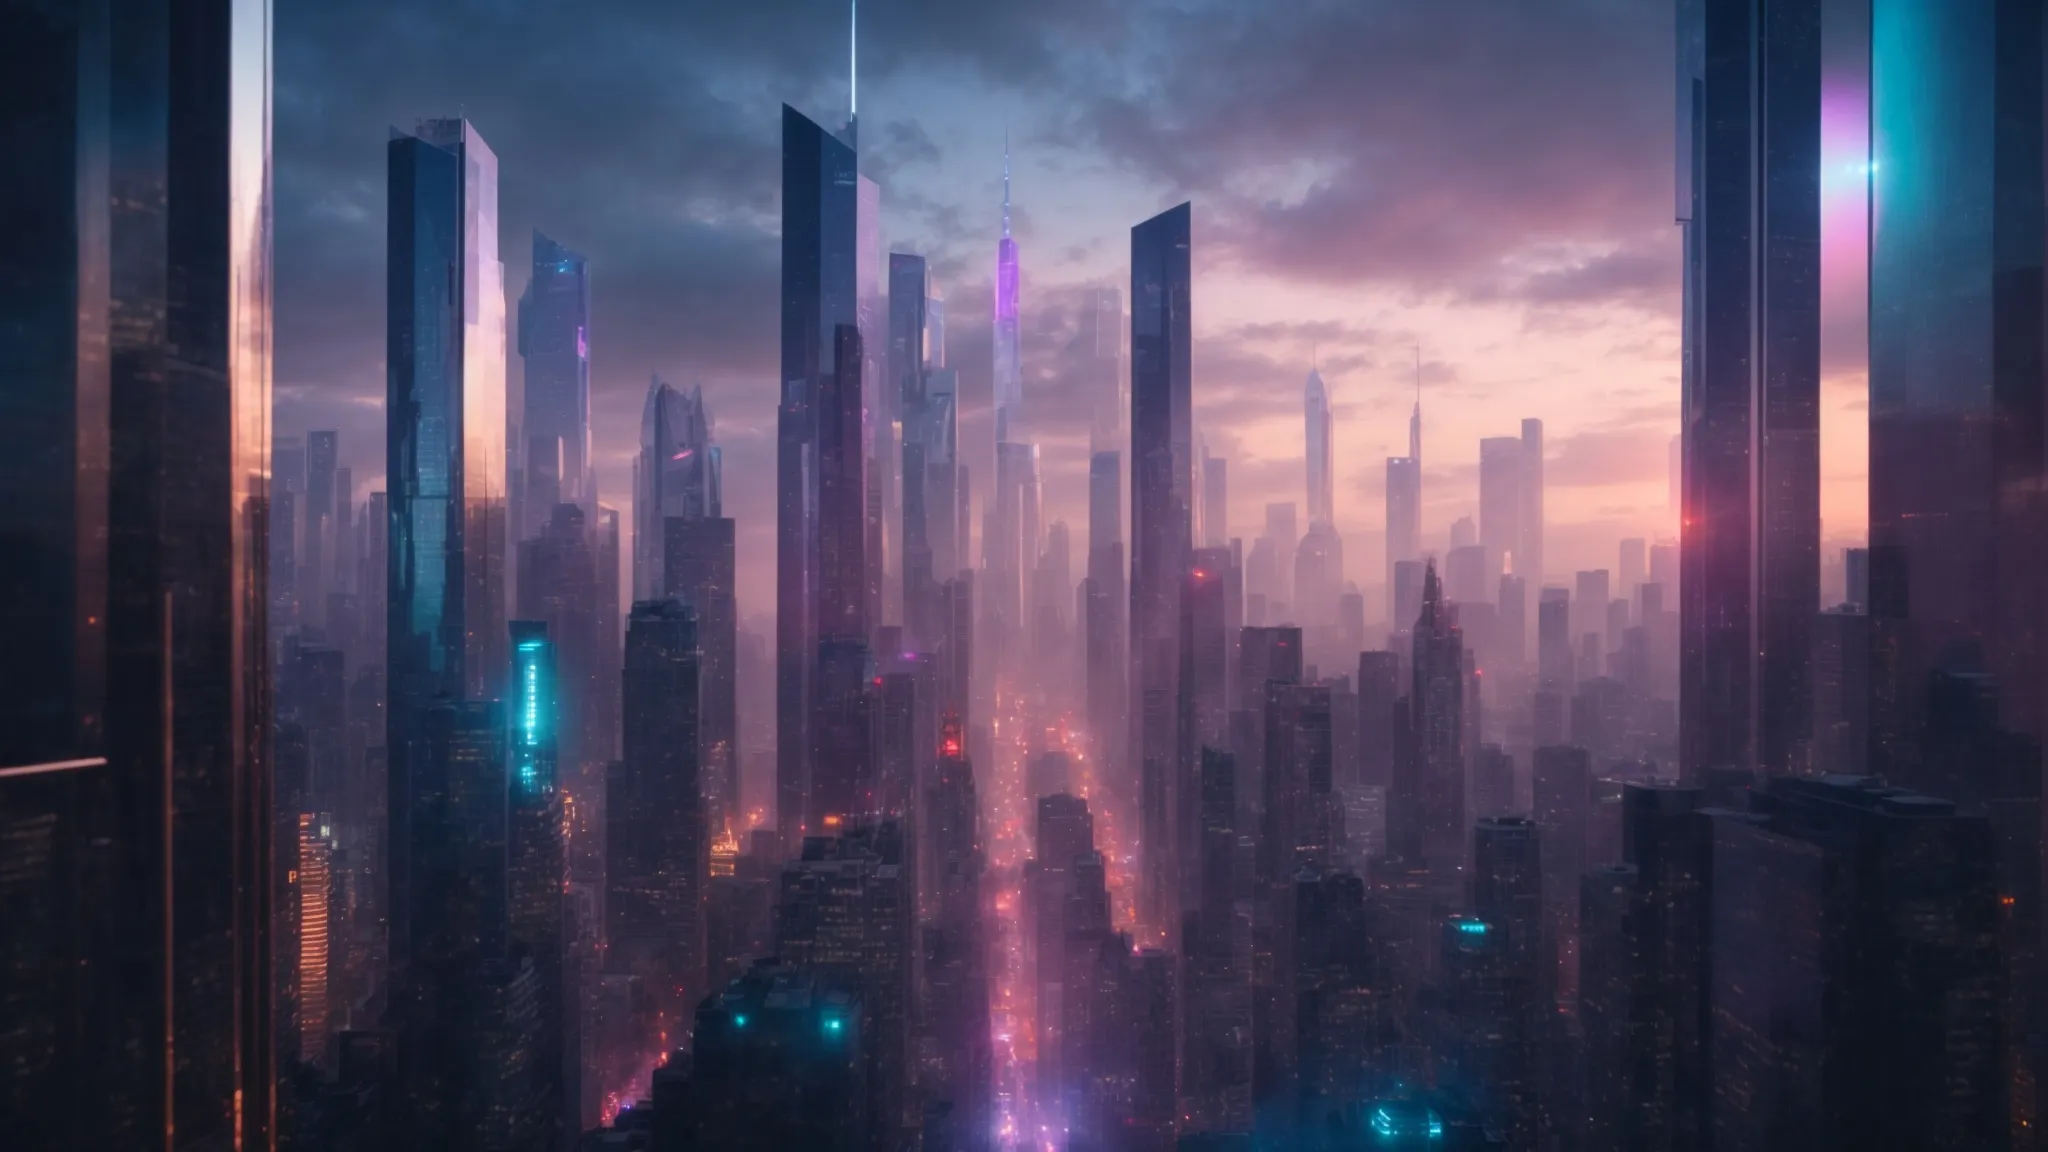 a futuristic cityscape at dusk, where holographic displays vividly bring personalized marketing experiences to life amidst the towering skyscrapers.